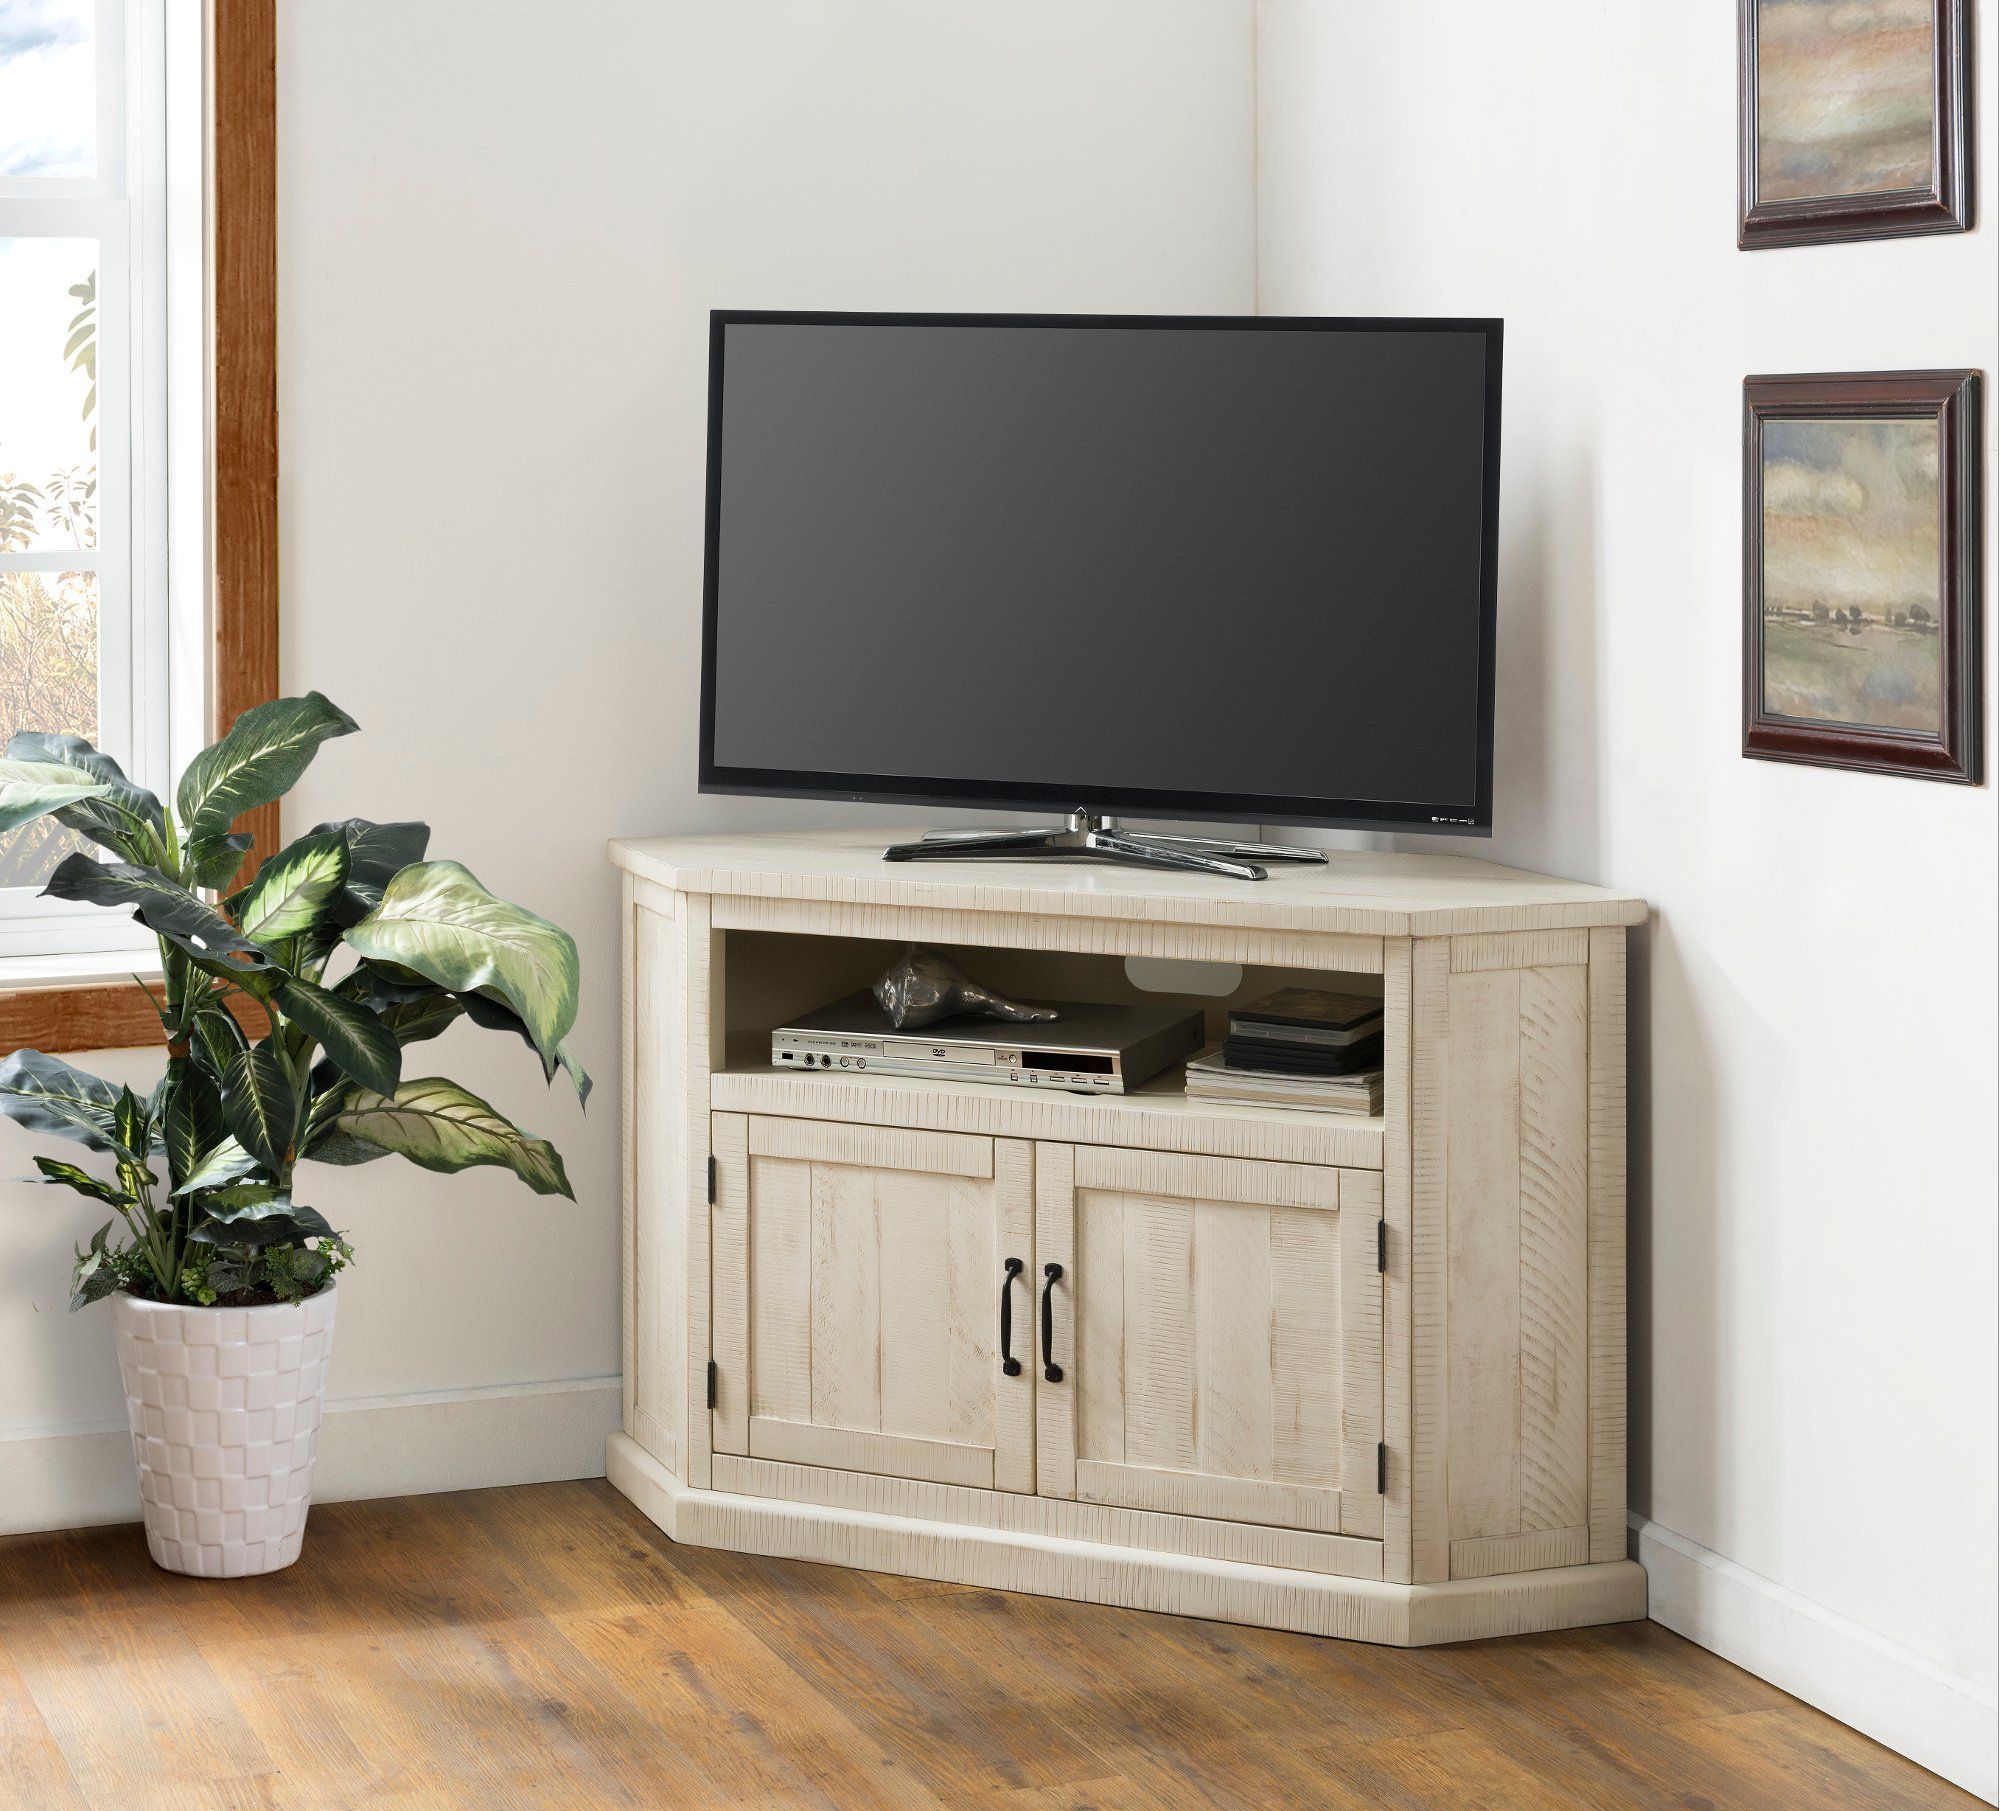 White Wash Country Corner Tv Stand – Rustic In 2020 | Wood With White Corner Tv Cabinets (View 1 of 15)